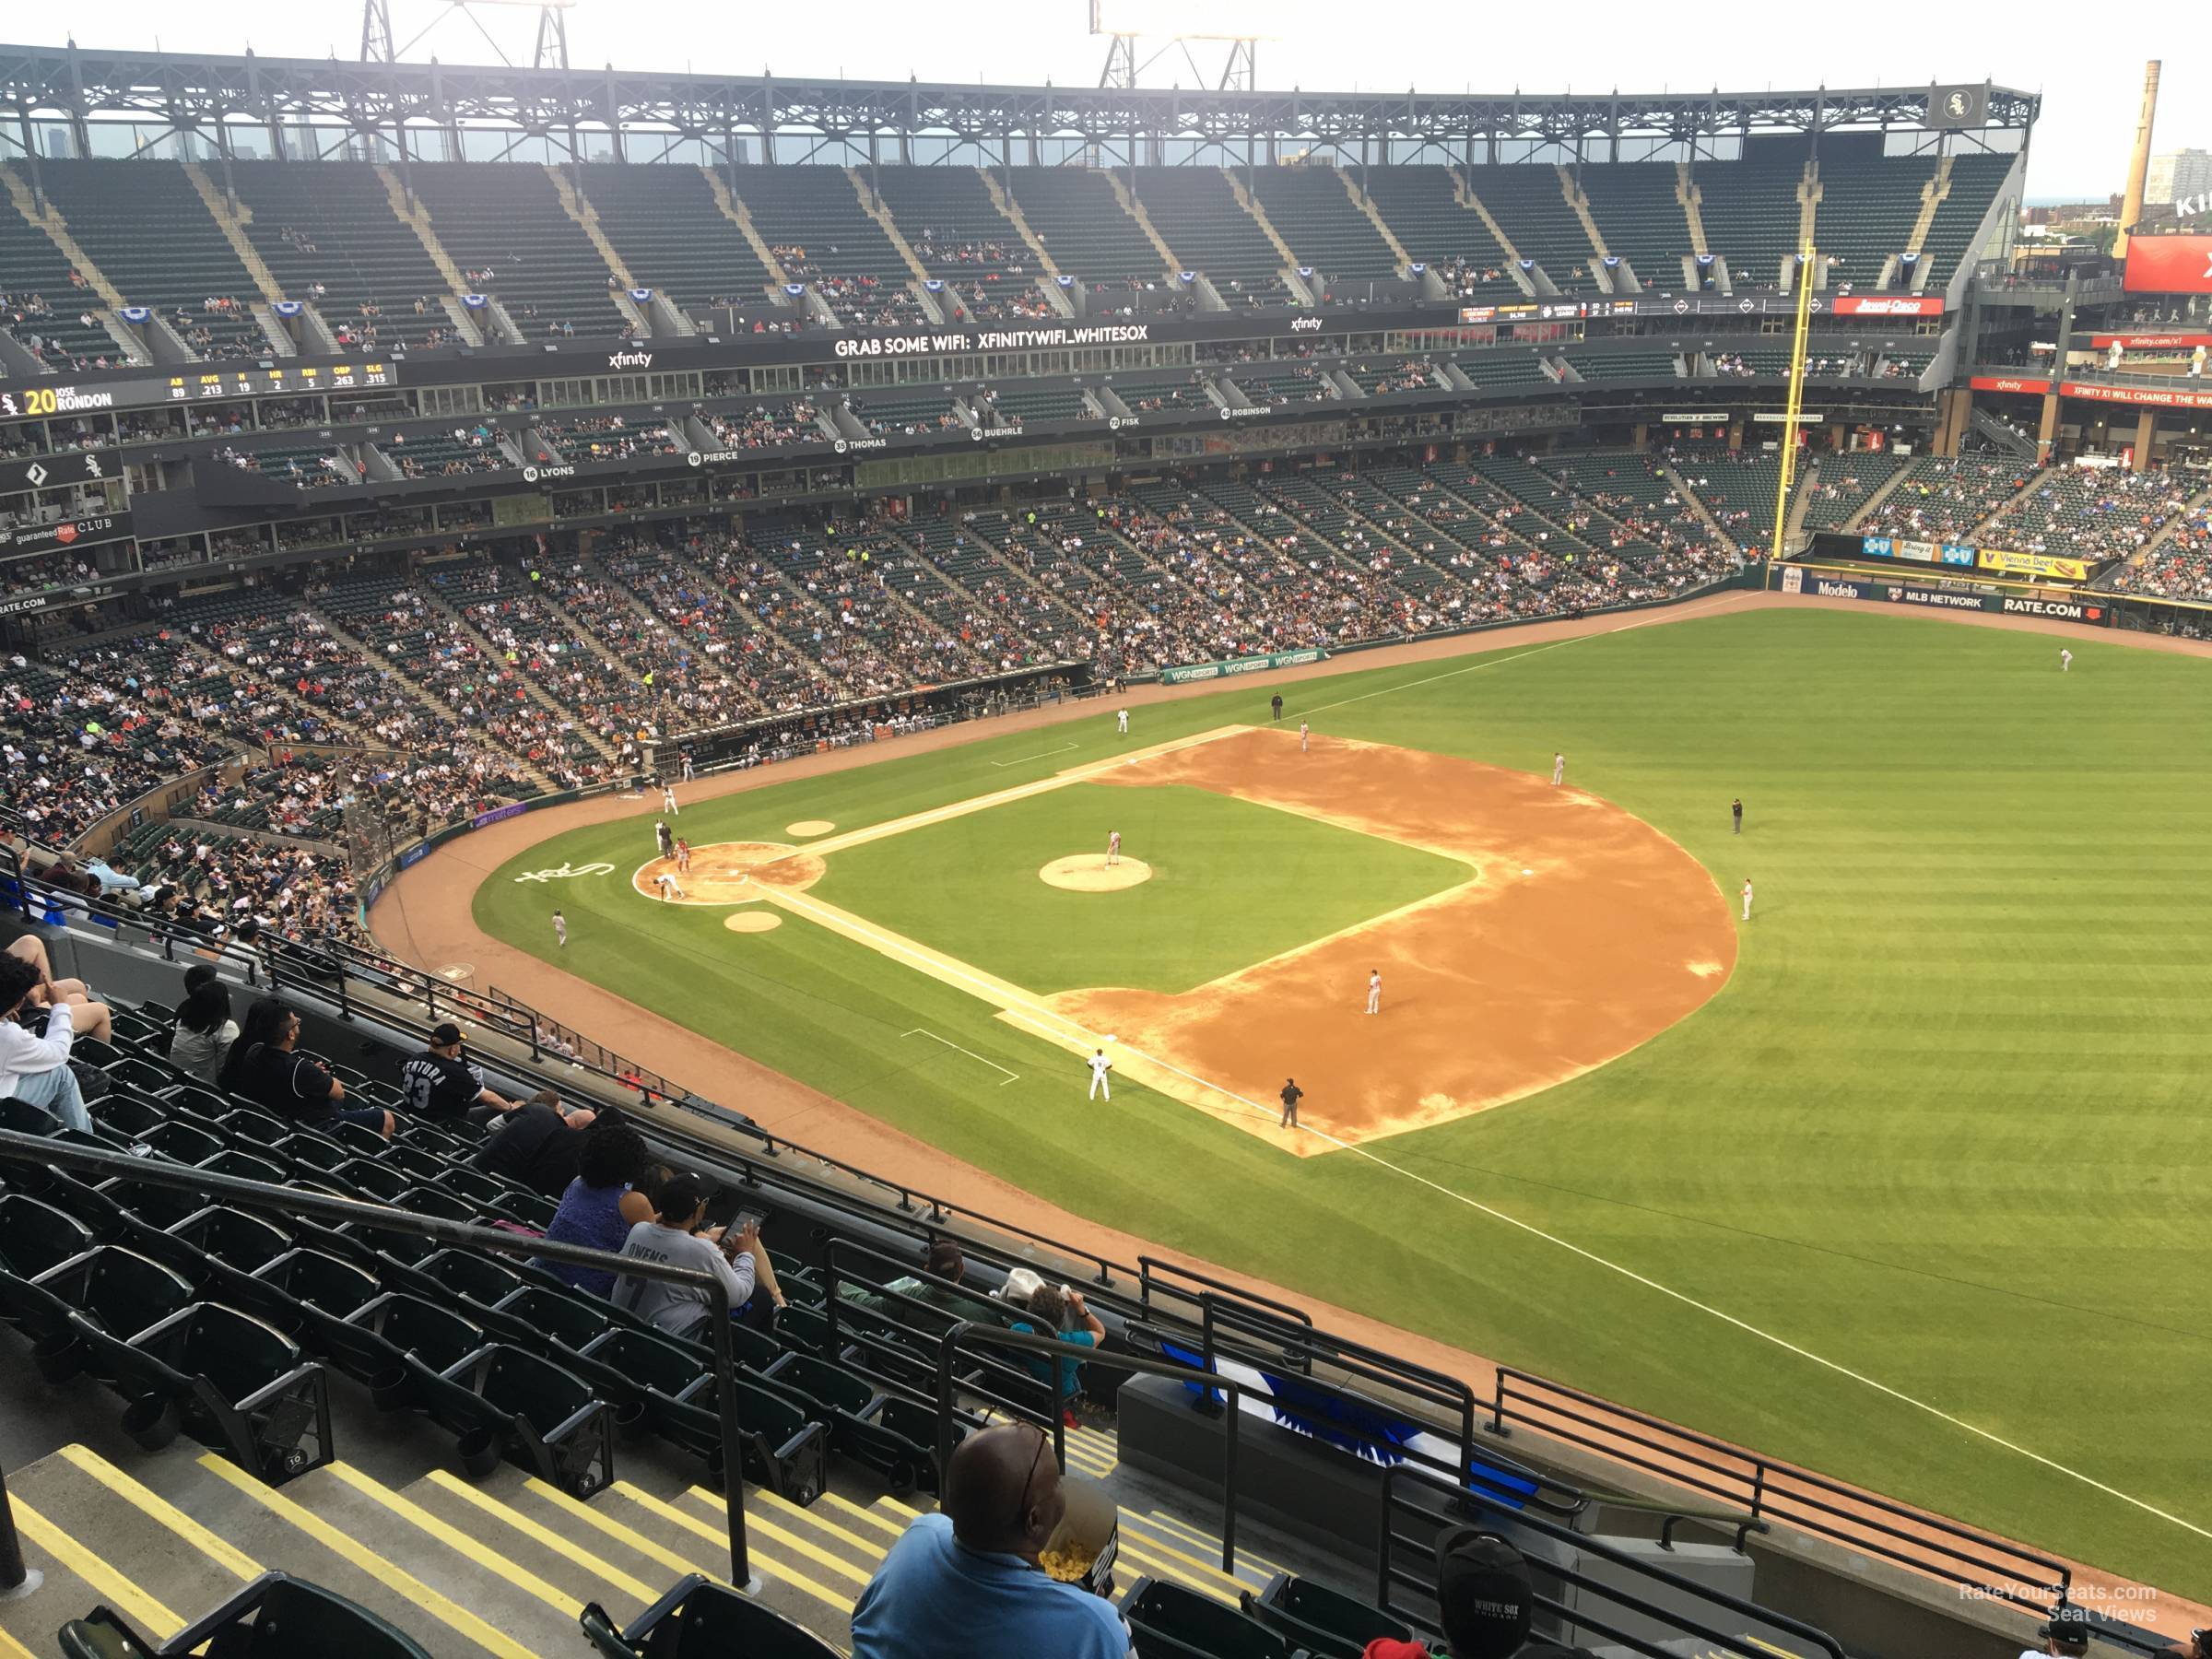 section 516, row 12 seat view  - guaranteed rate field